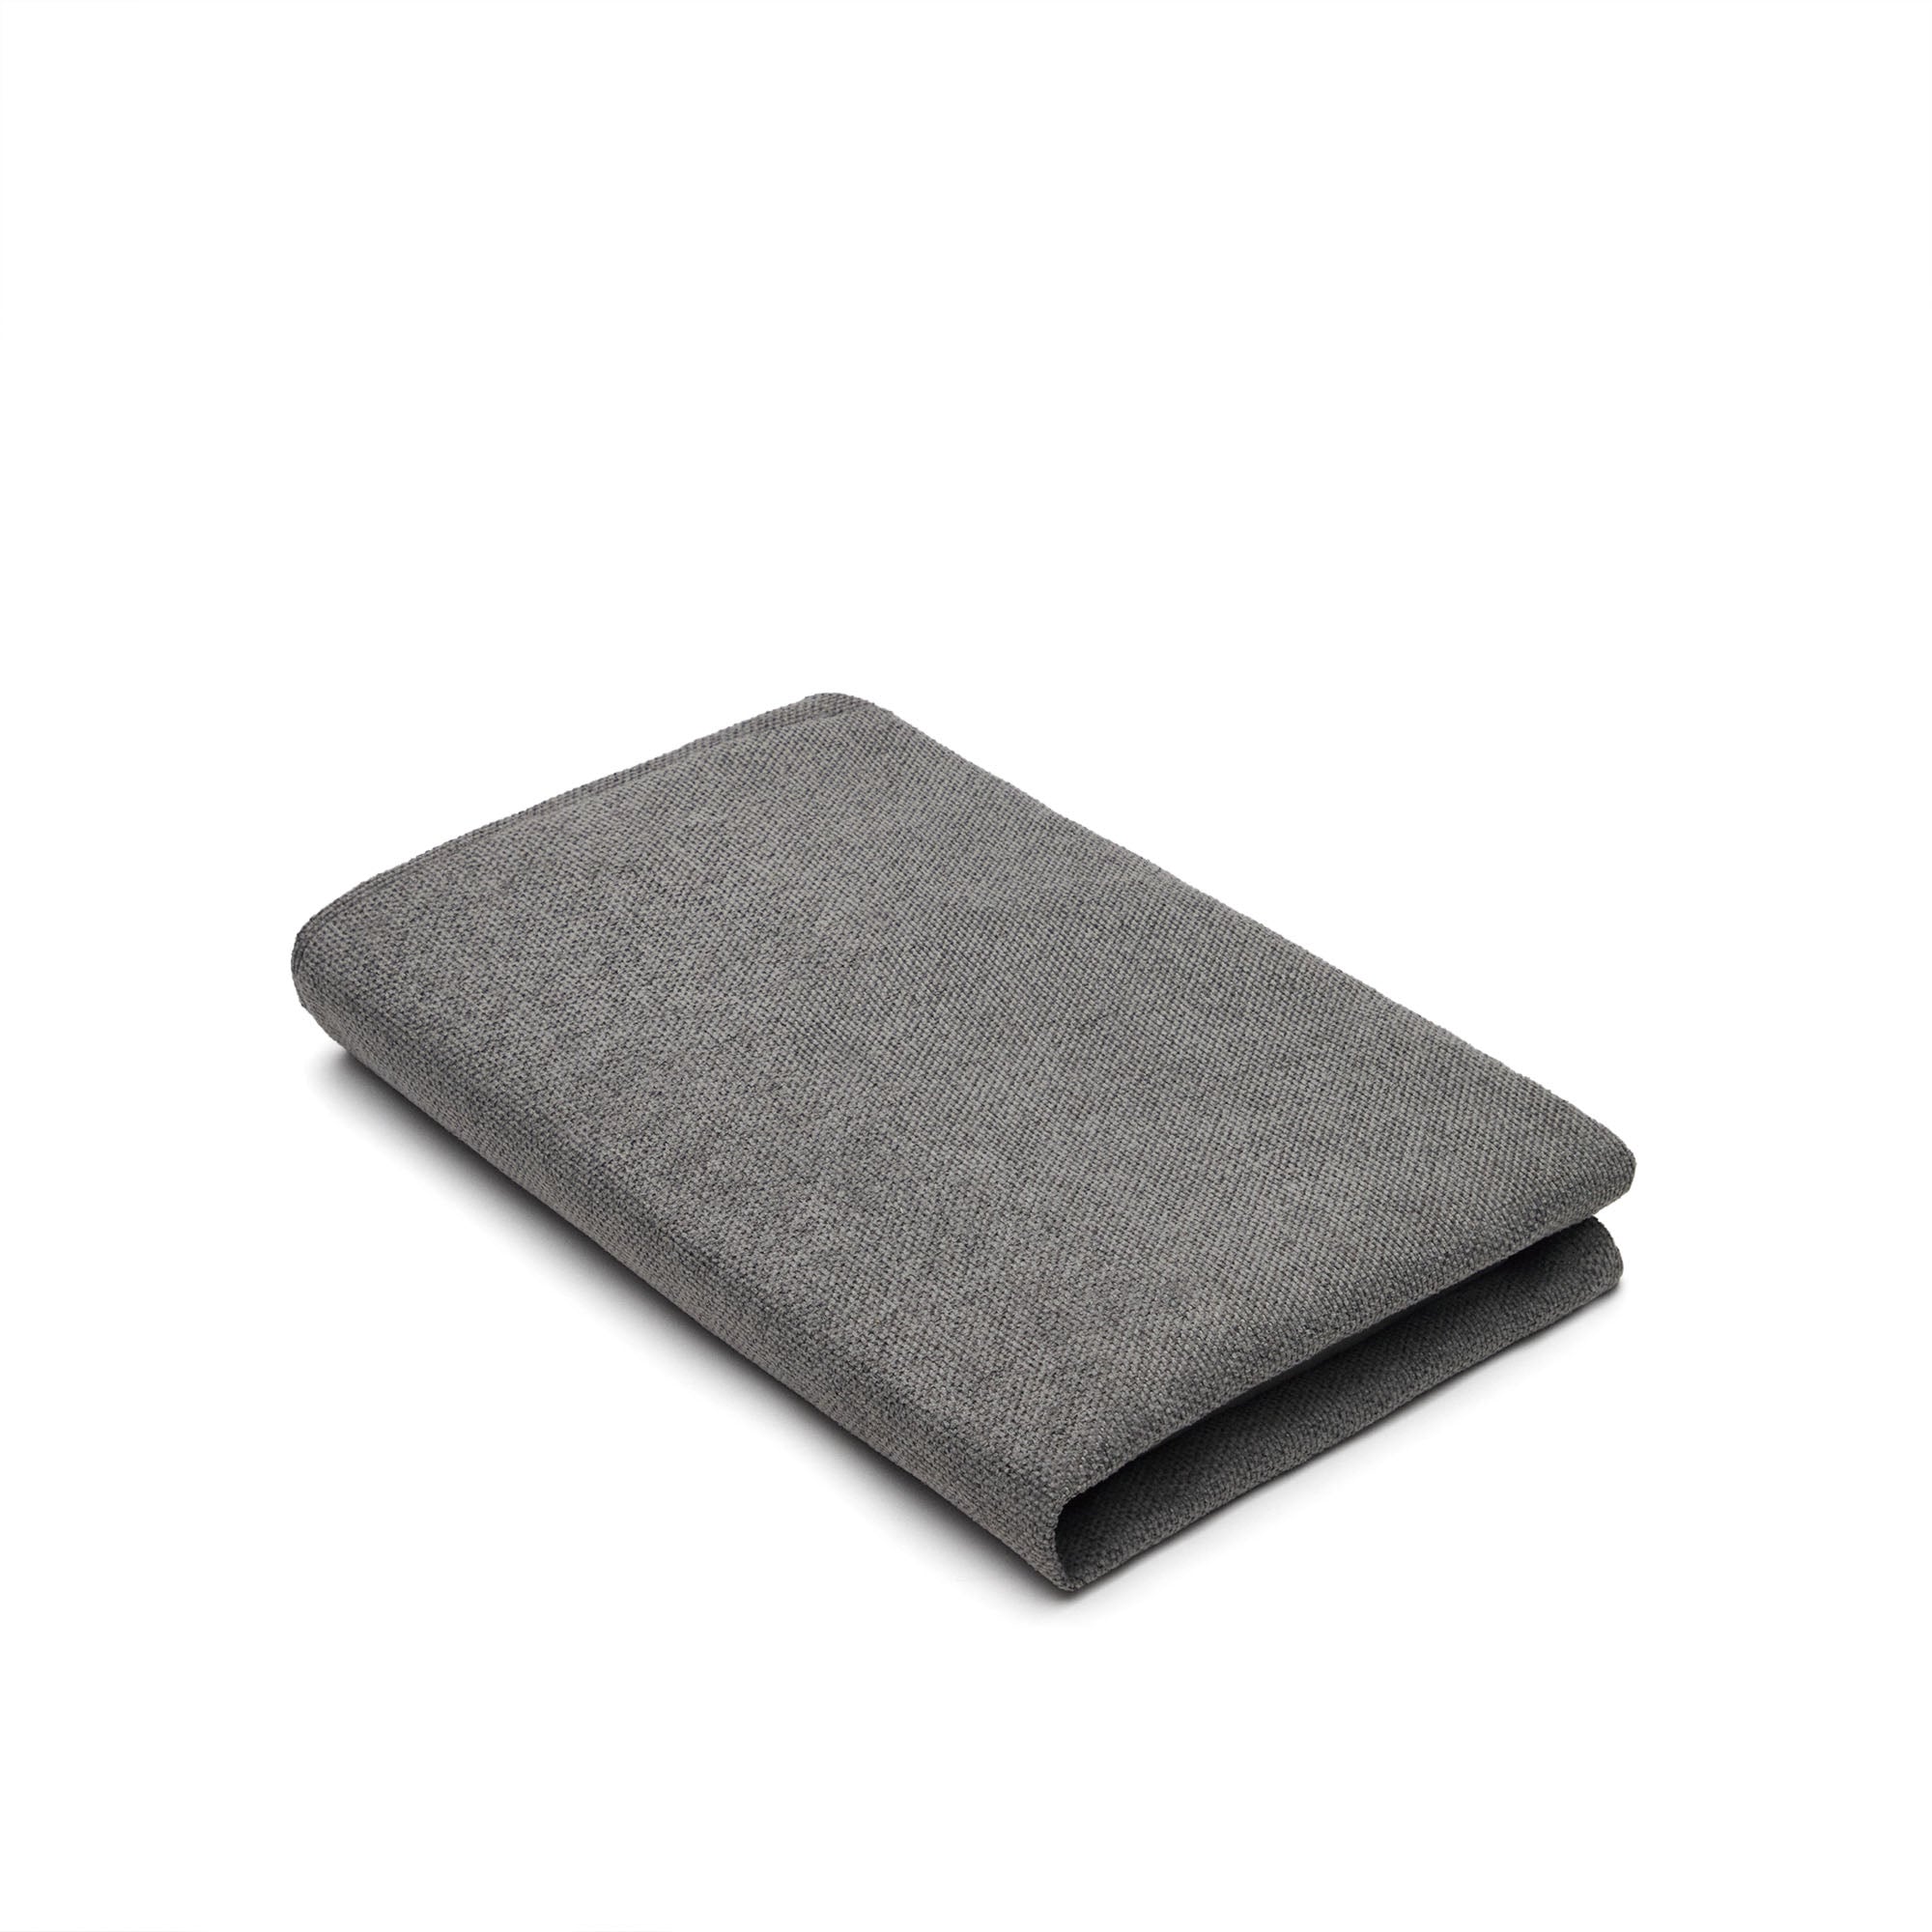 Bowie cover for large bed for pets in dark grey 73 x 98 cm